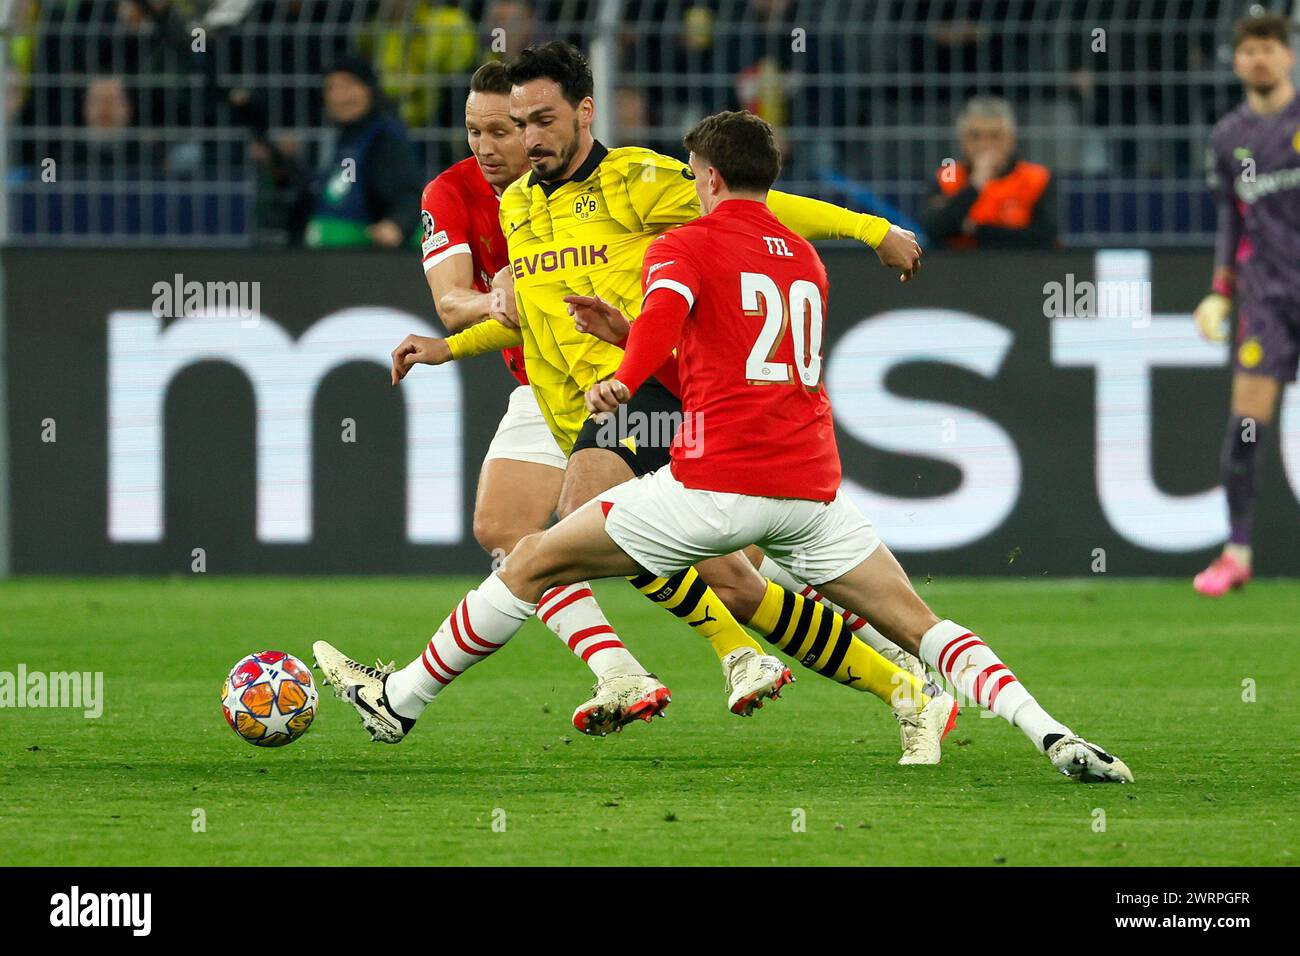 Dortmund, Germany. 13th Mar, 2024. Mats Hummels (C) of Borussia Dortmund vies with Luuk De Jong (L) and Guus Til of PSV Eindhoven during the UEFA Champions League round of 16 match in Dortmund, Germany, March 13, 2024. Credit: Joachim Bywaletz/Xinhua/Alamy Live News Stock Photo